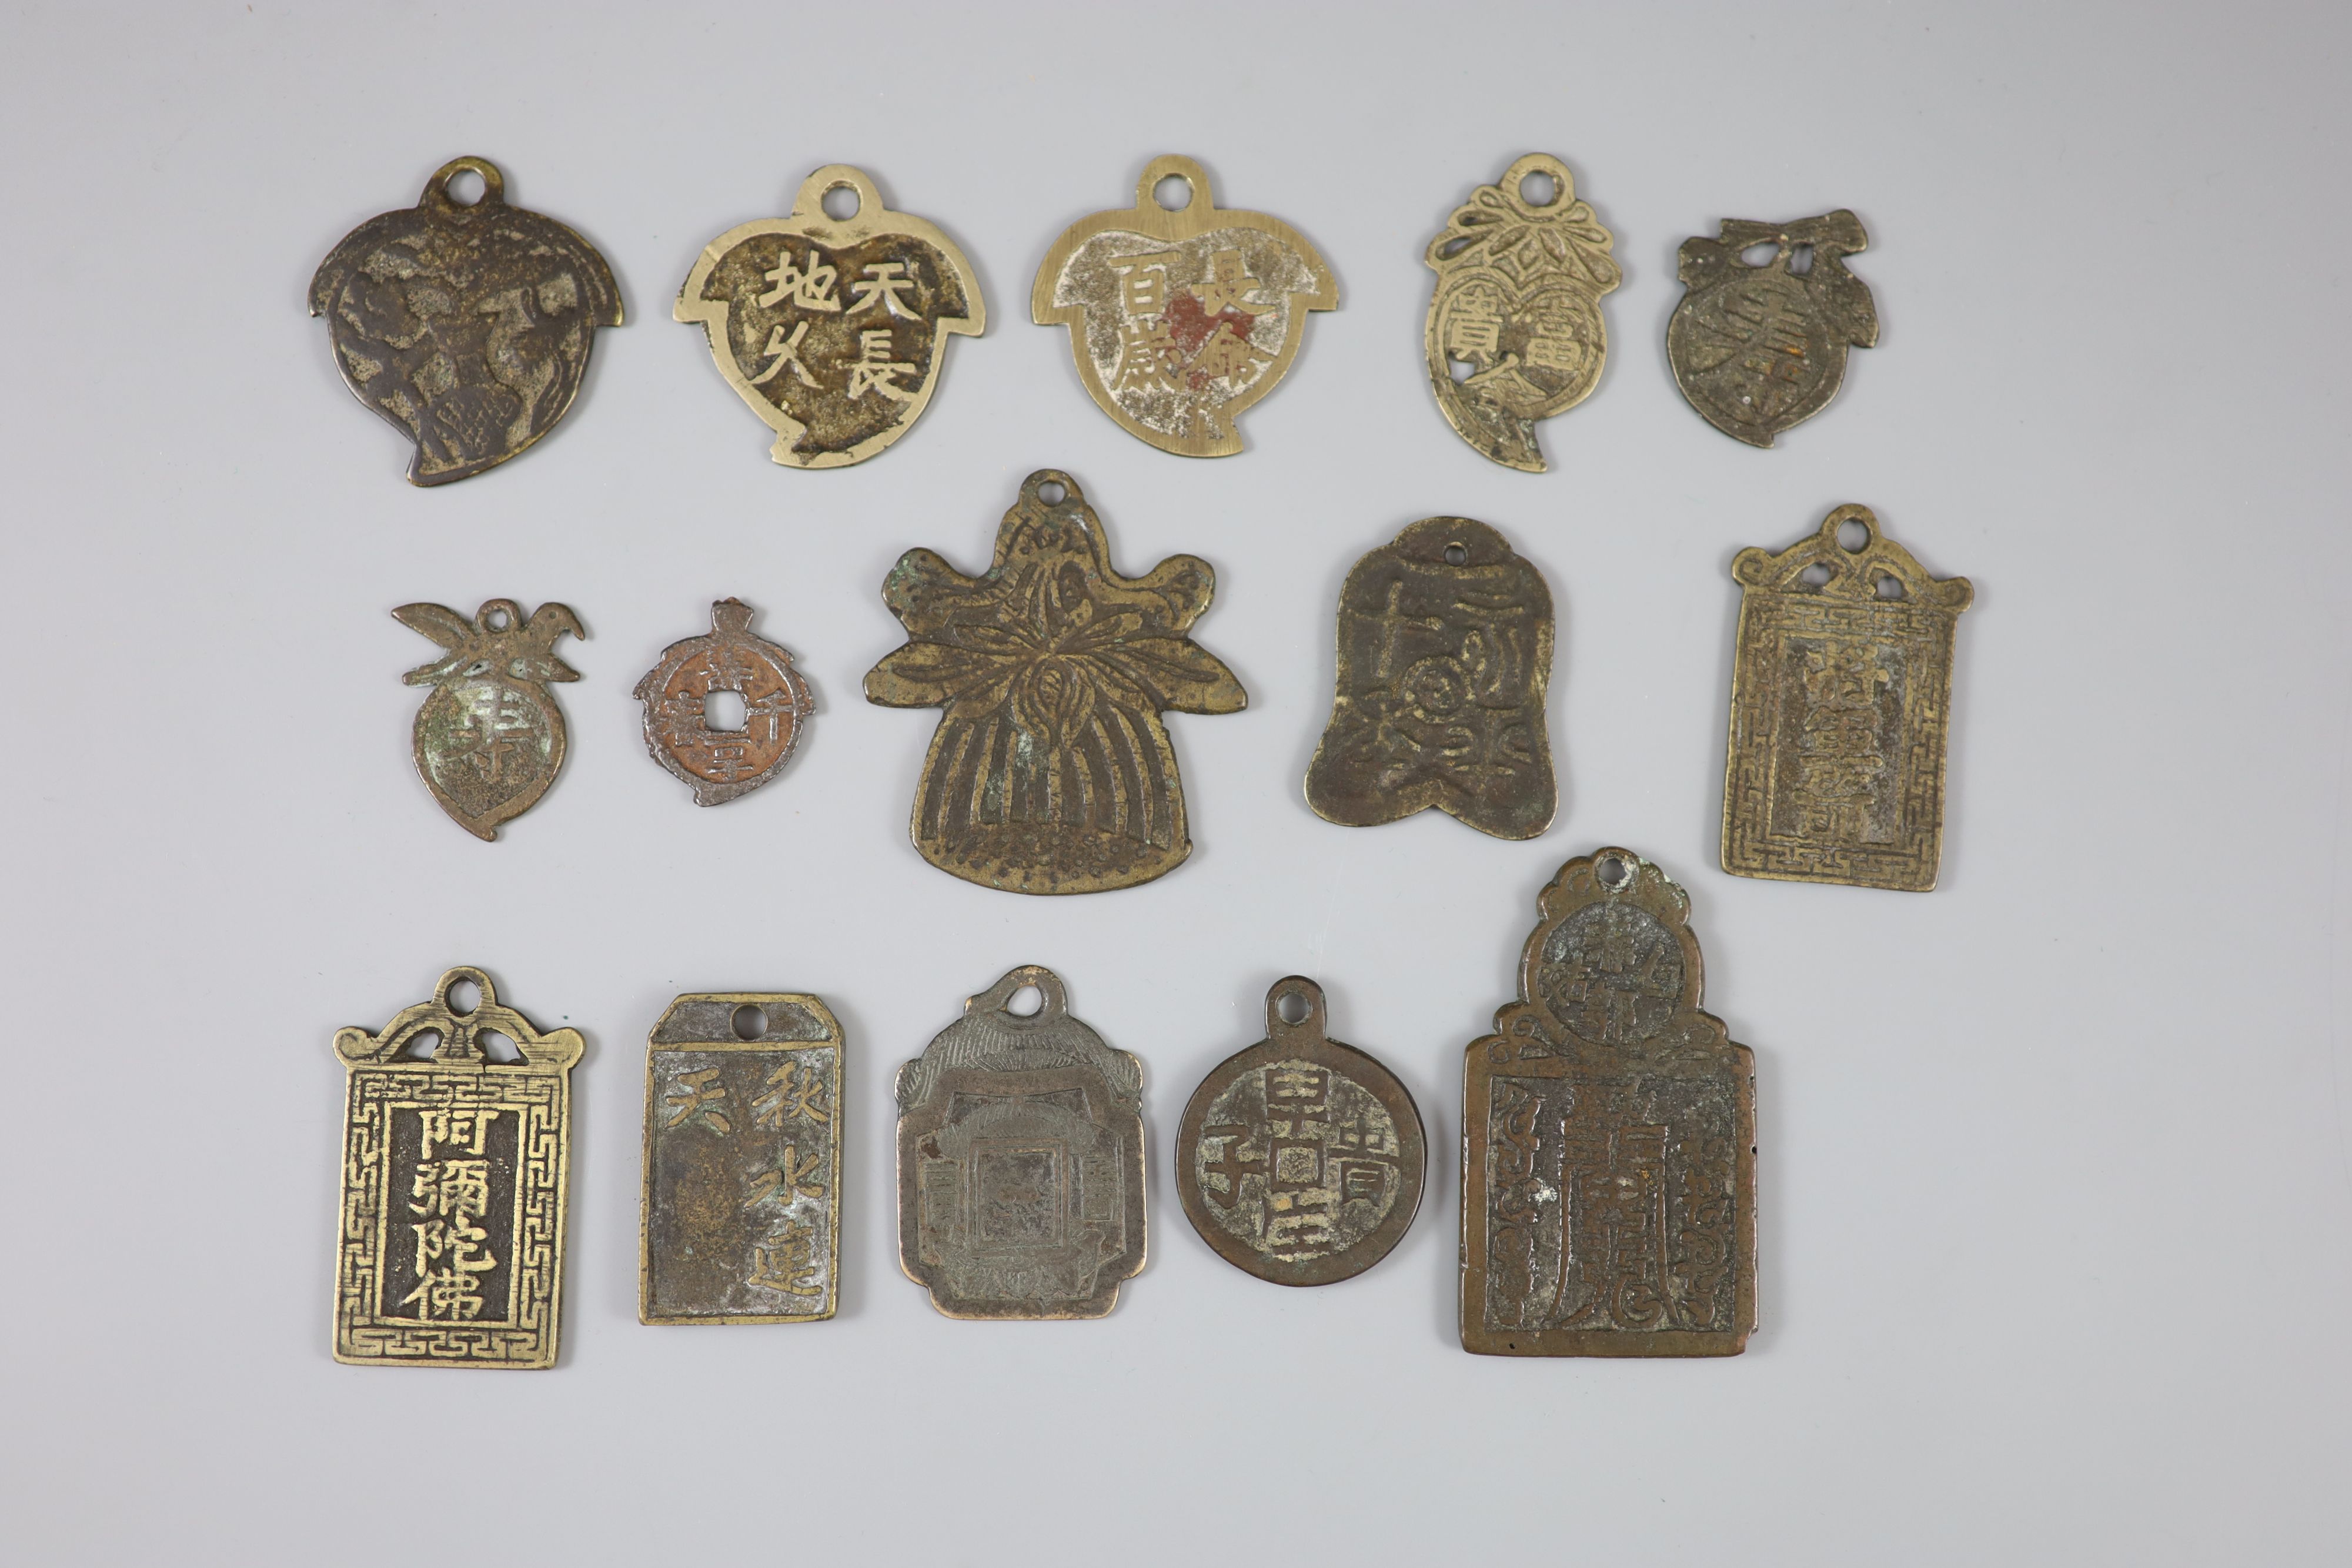 China, 15 bronze pendant charms or amulets, Qing dynasty,